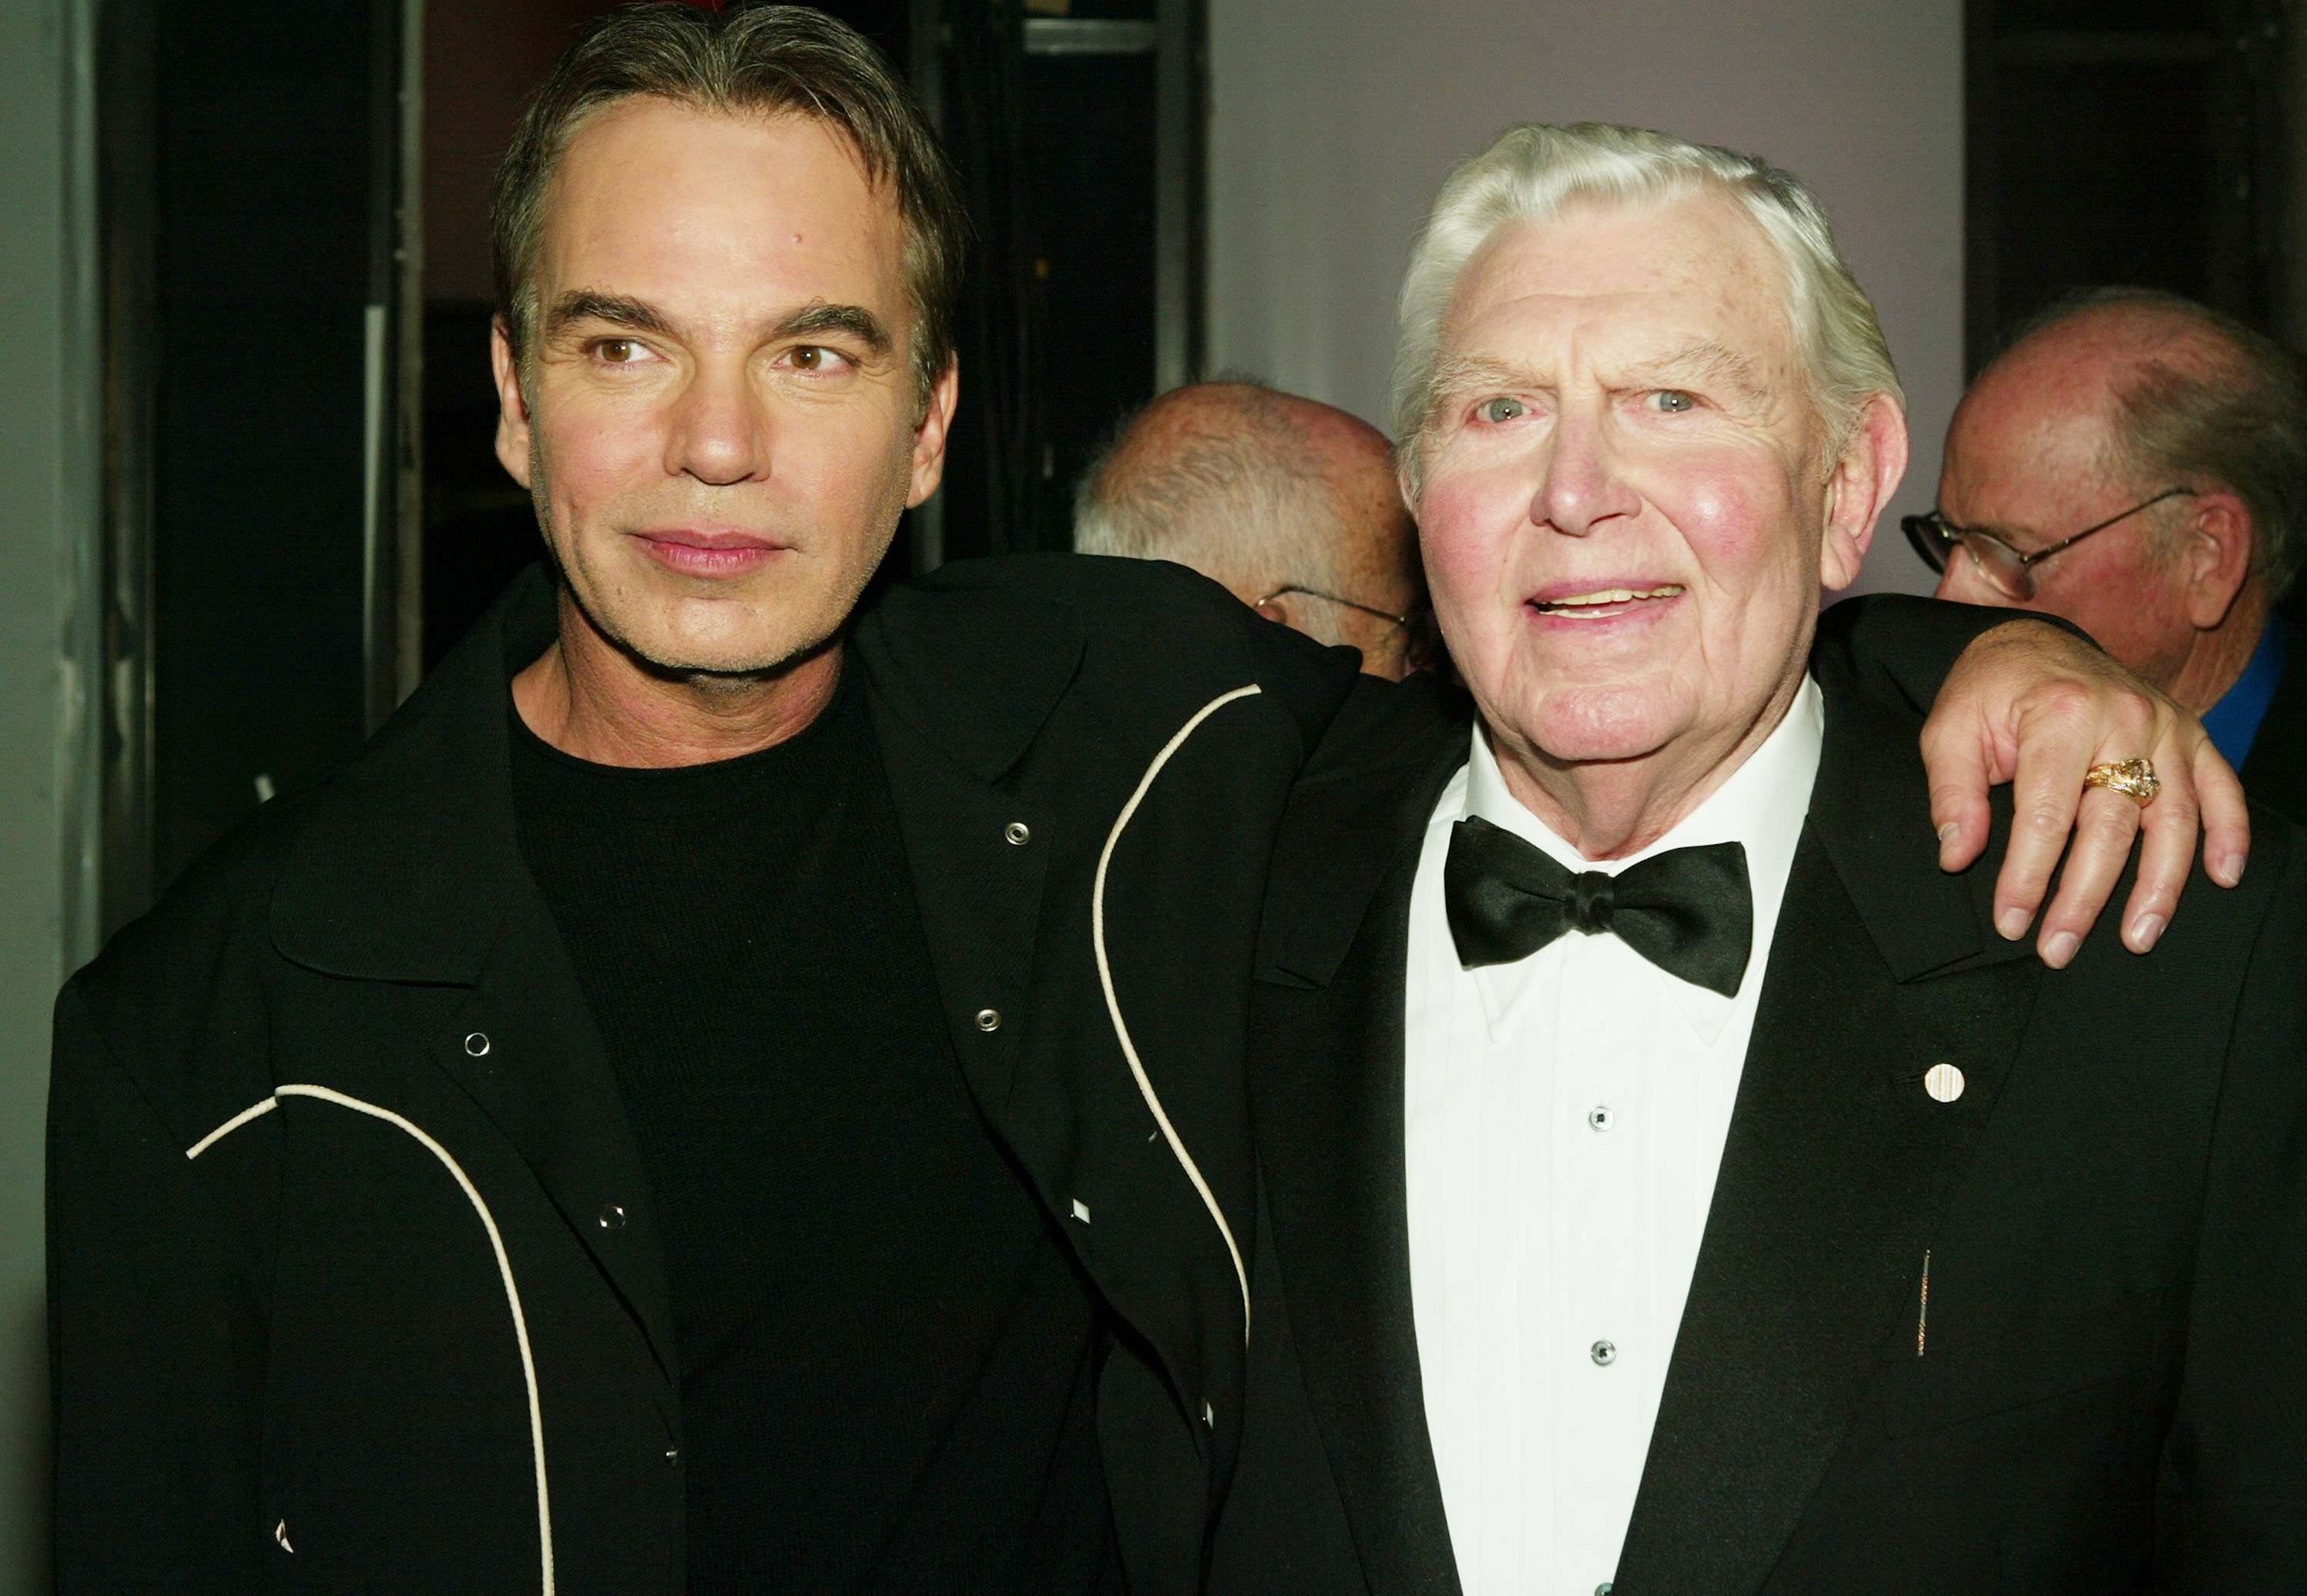 Billy Bob Thornton and Andy Griffith in 2004